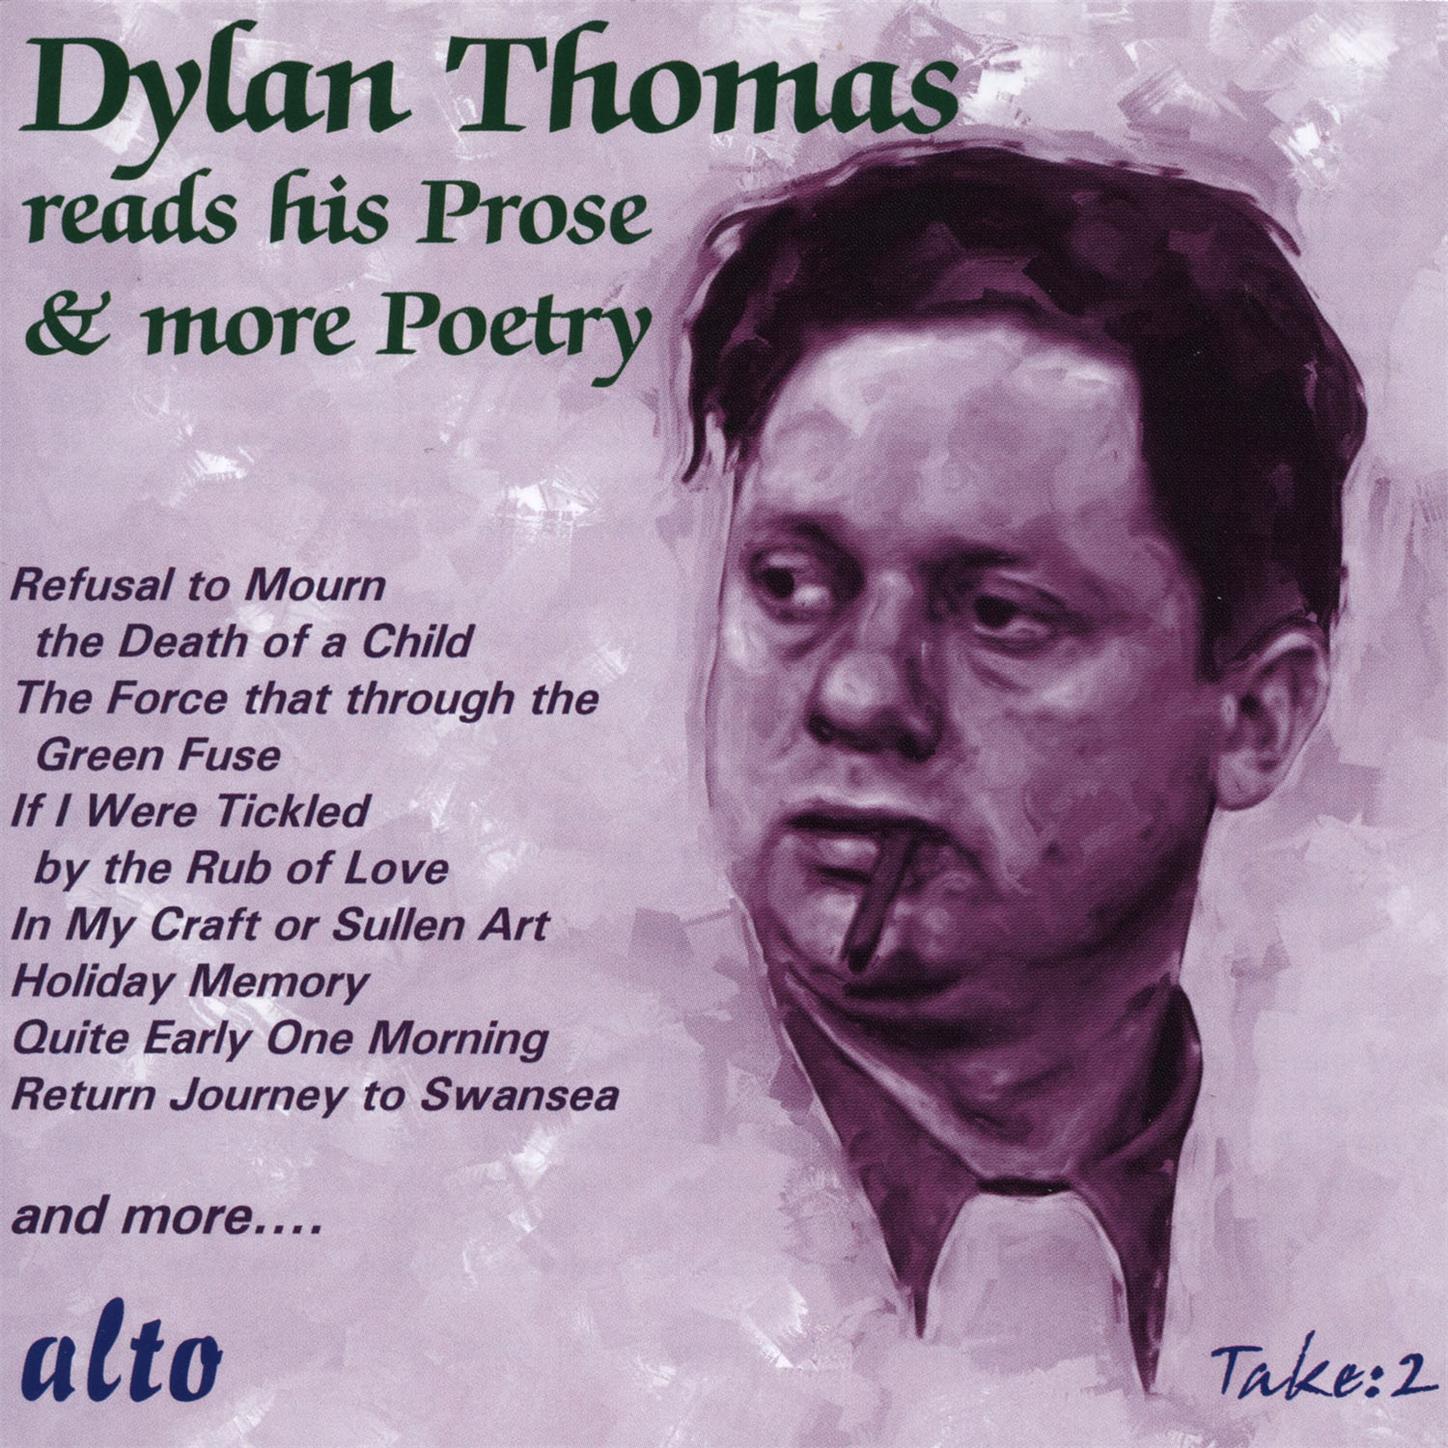 Dylan Thomas reads his prose & more poetry